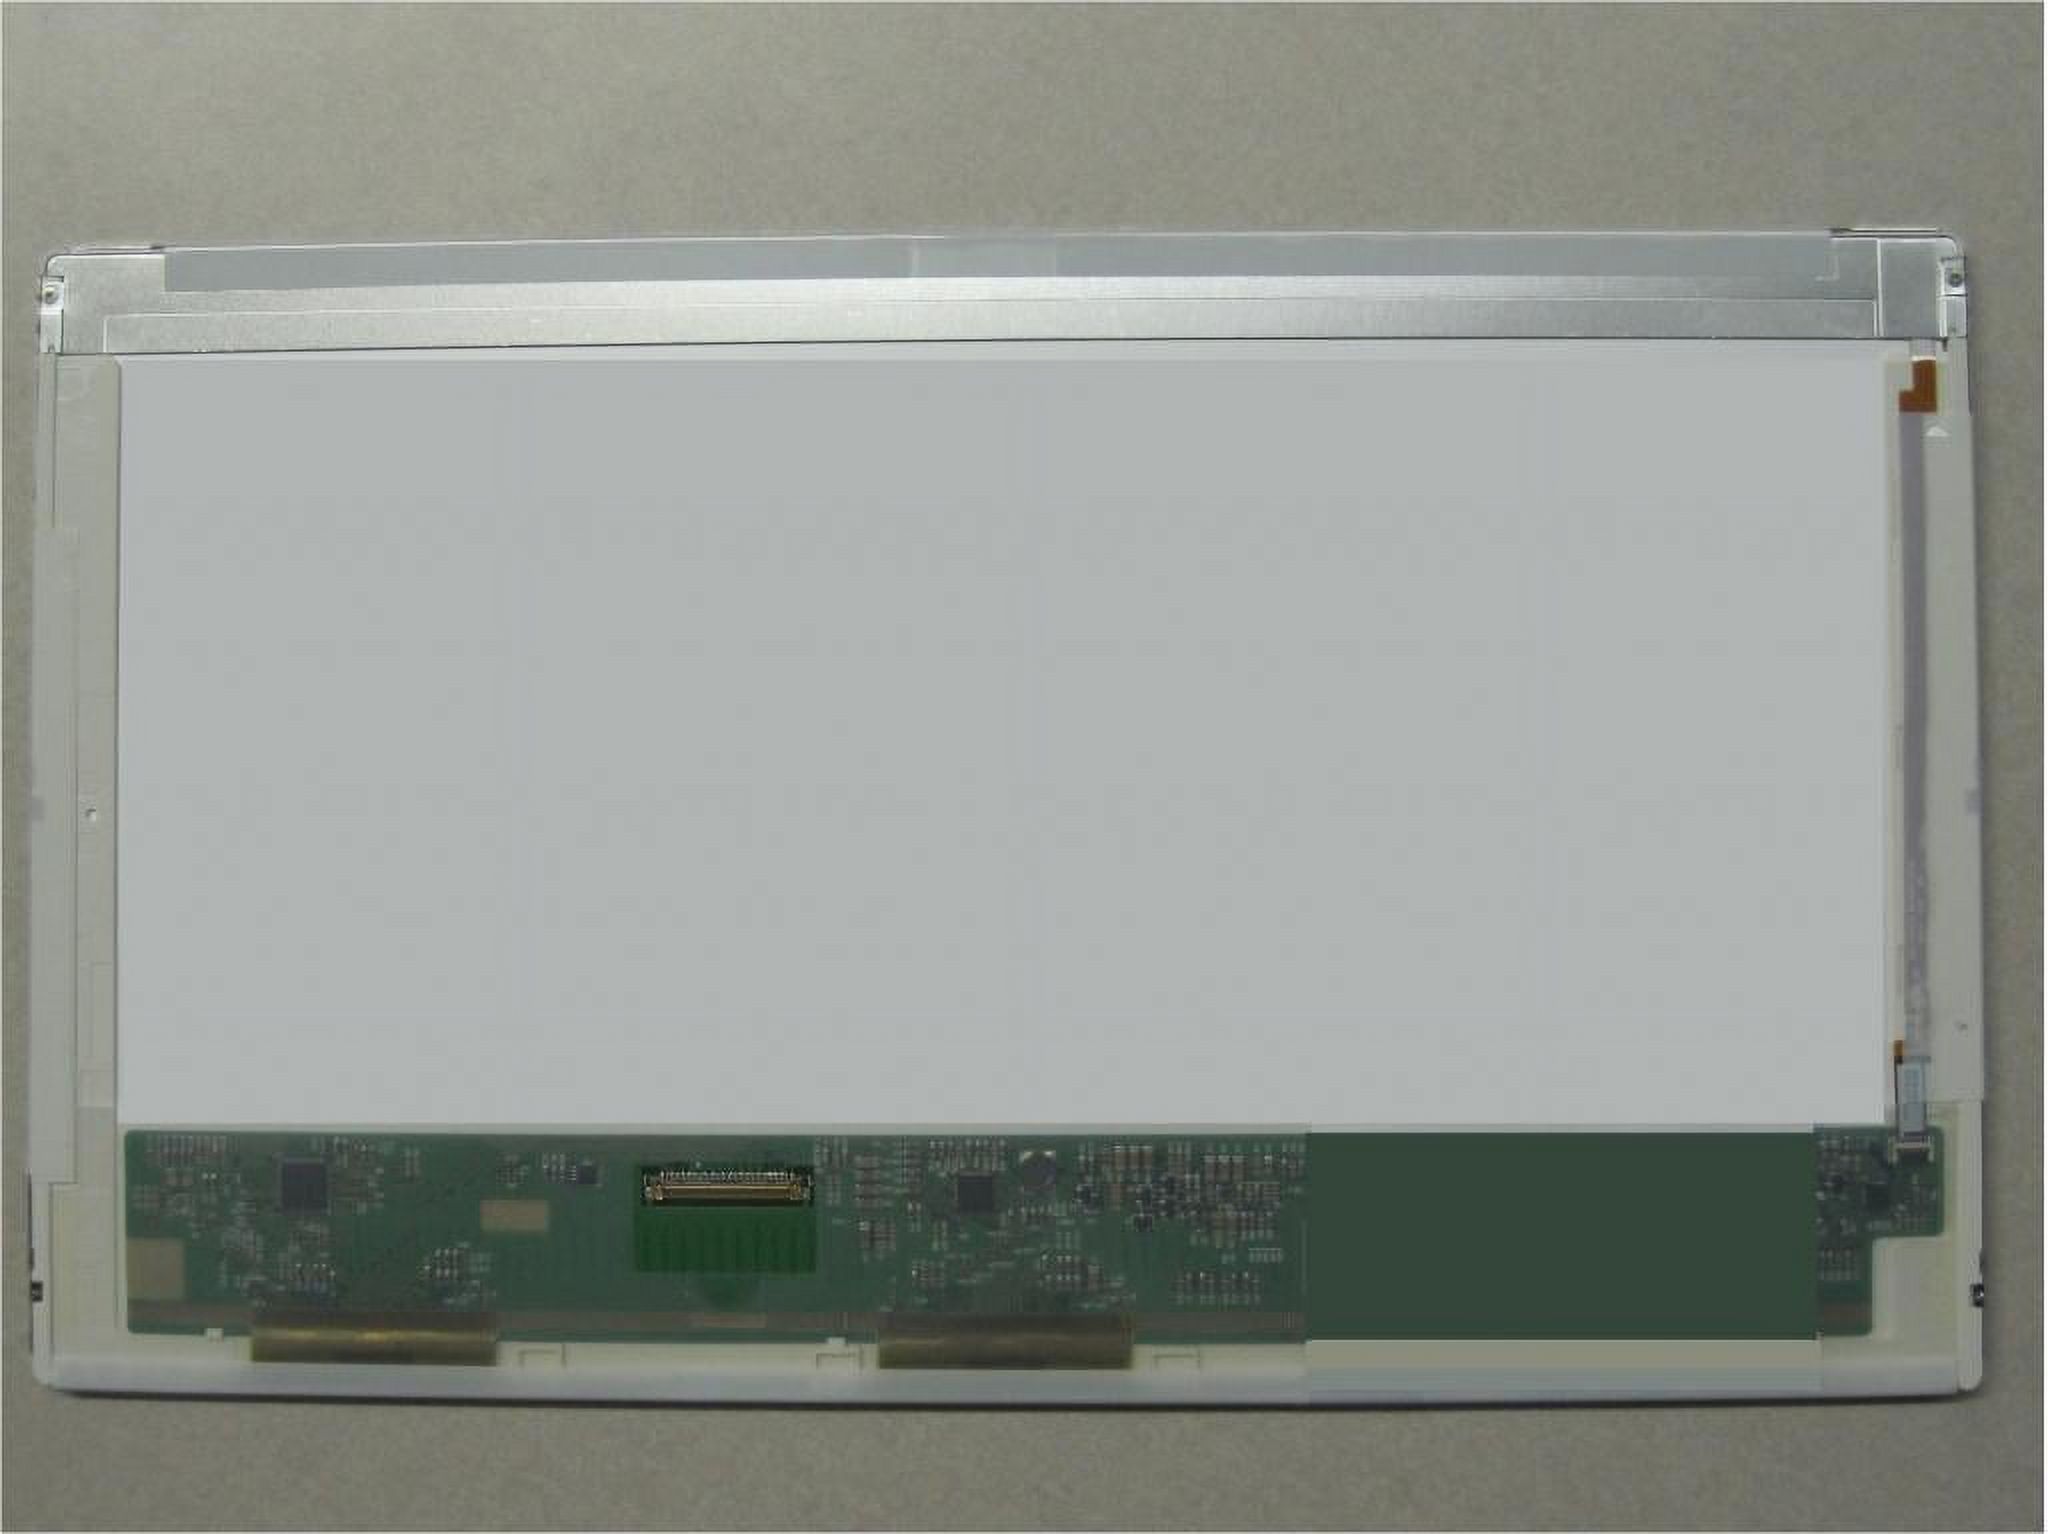 Dell C591j Replacement LAPTOP LCD Screen 14.0" WXGA HD LED DIODE (Substitute Only. Not a ) (0C591J B140XW01 V.0) - image 1 of 2